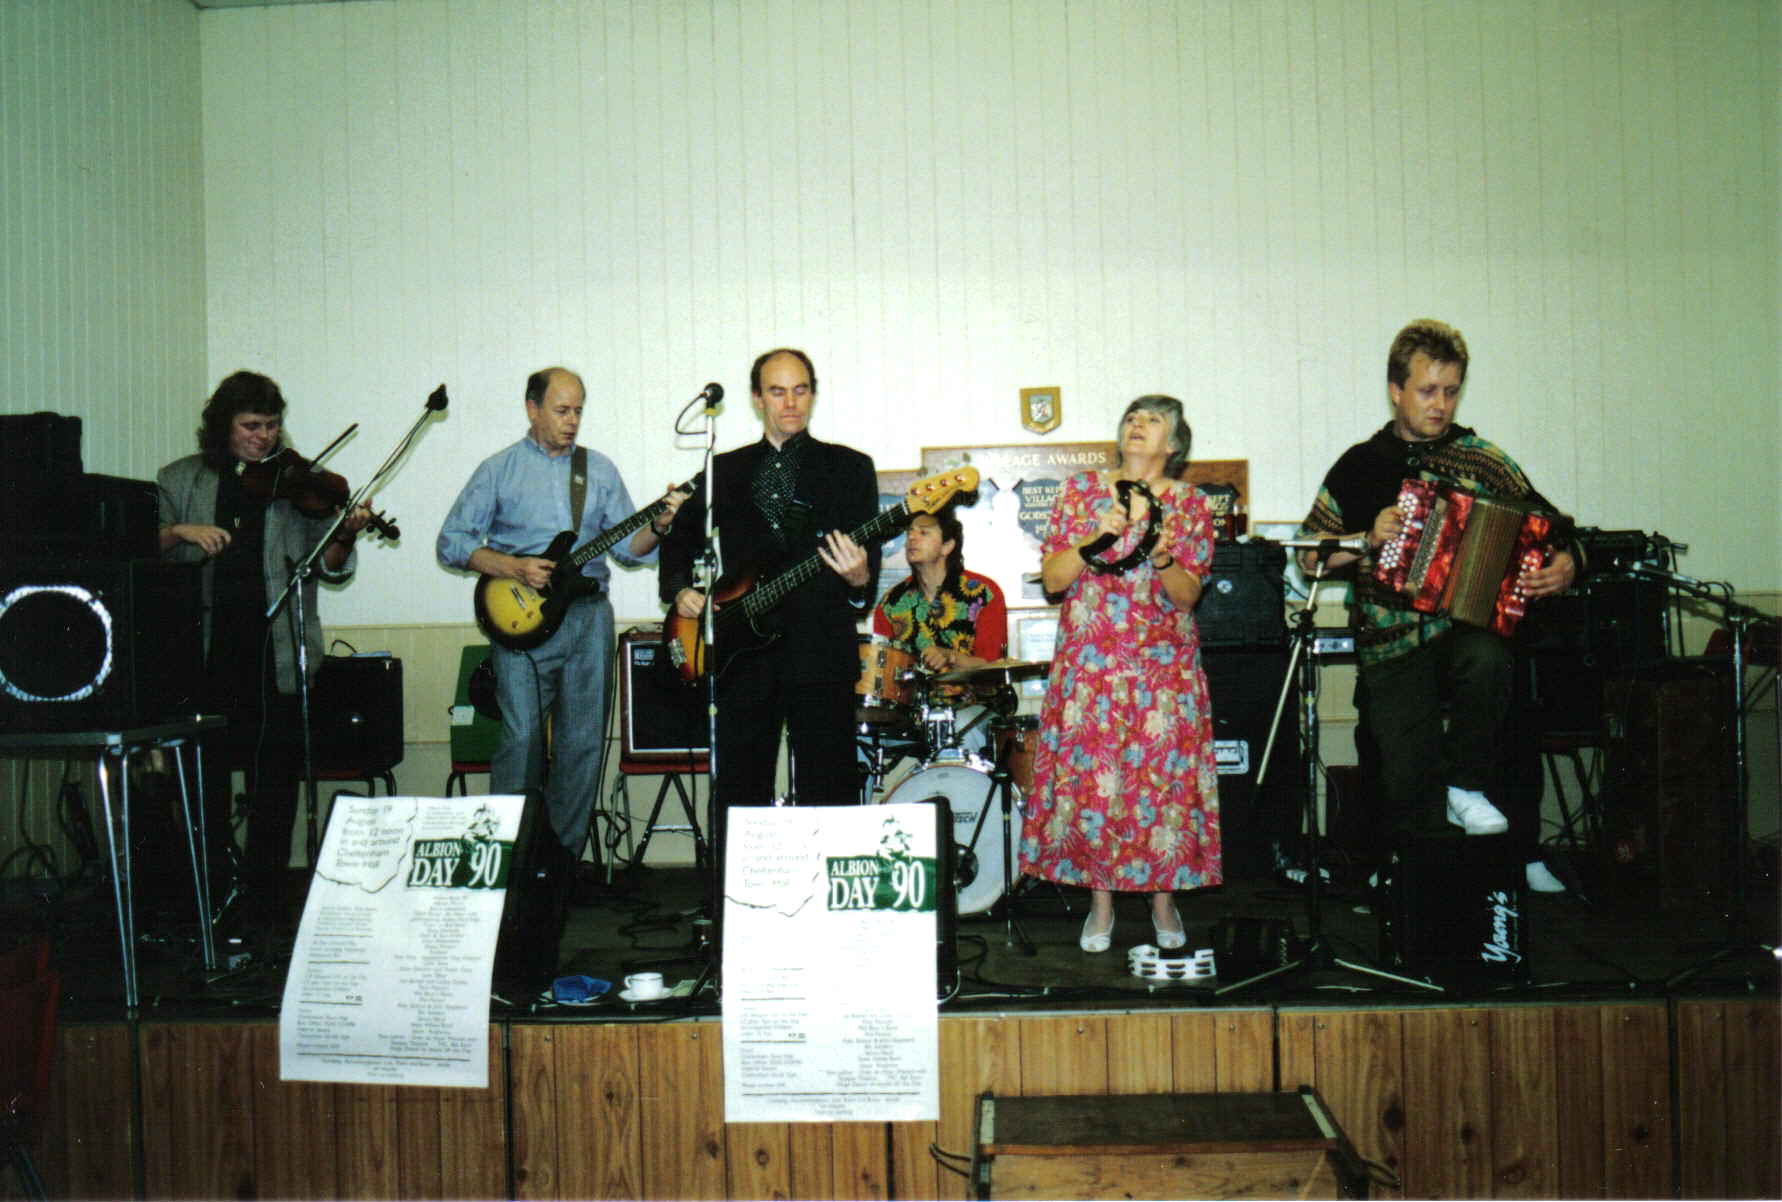 Stephen Giles with the Albion Band, 1990